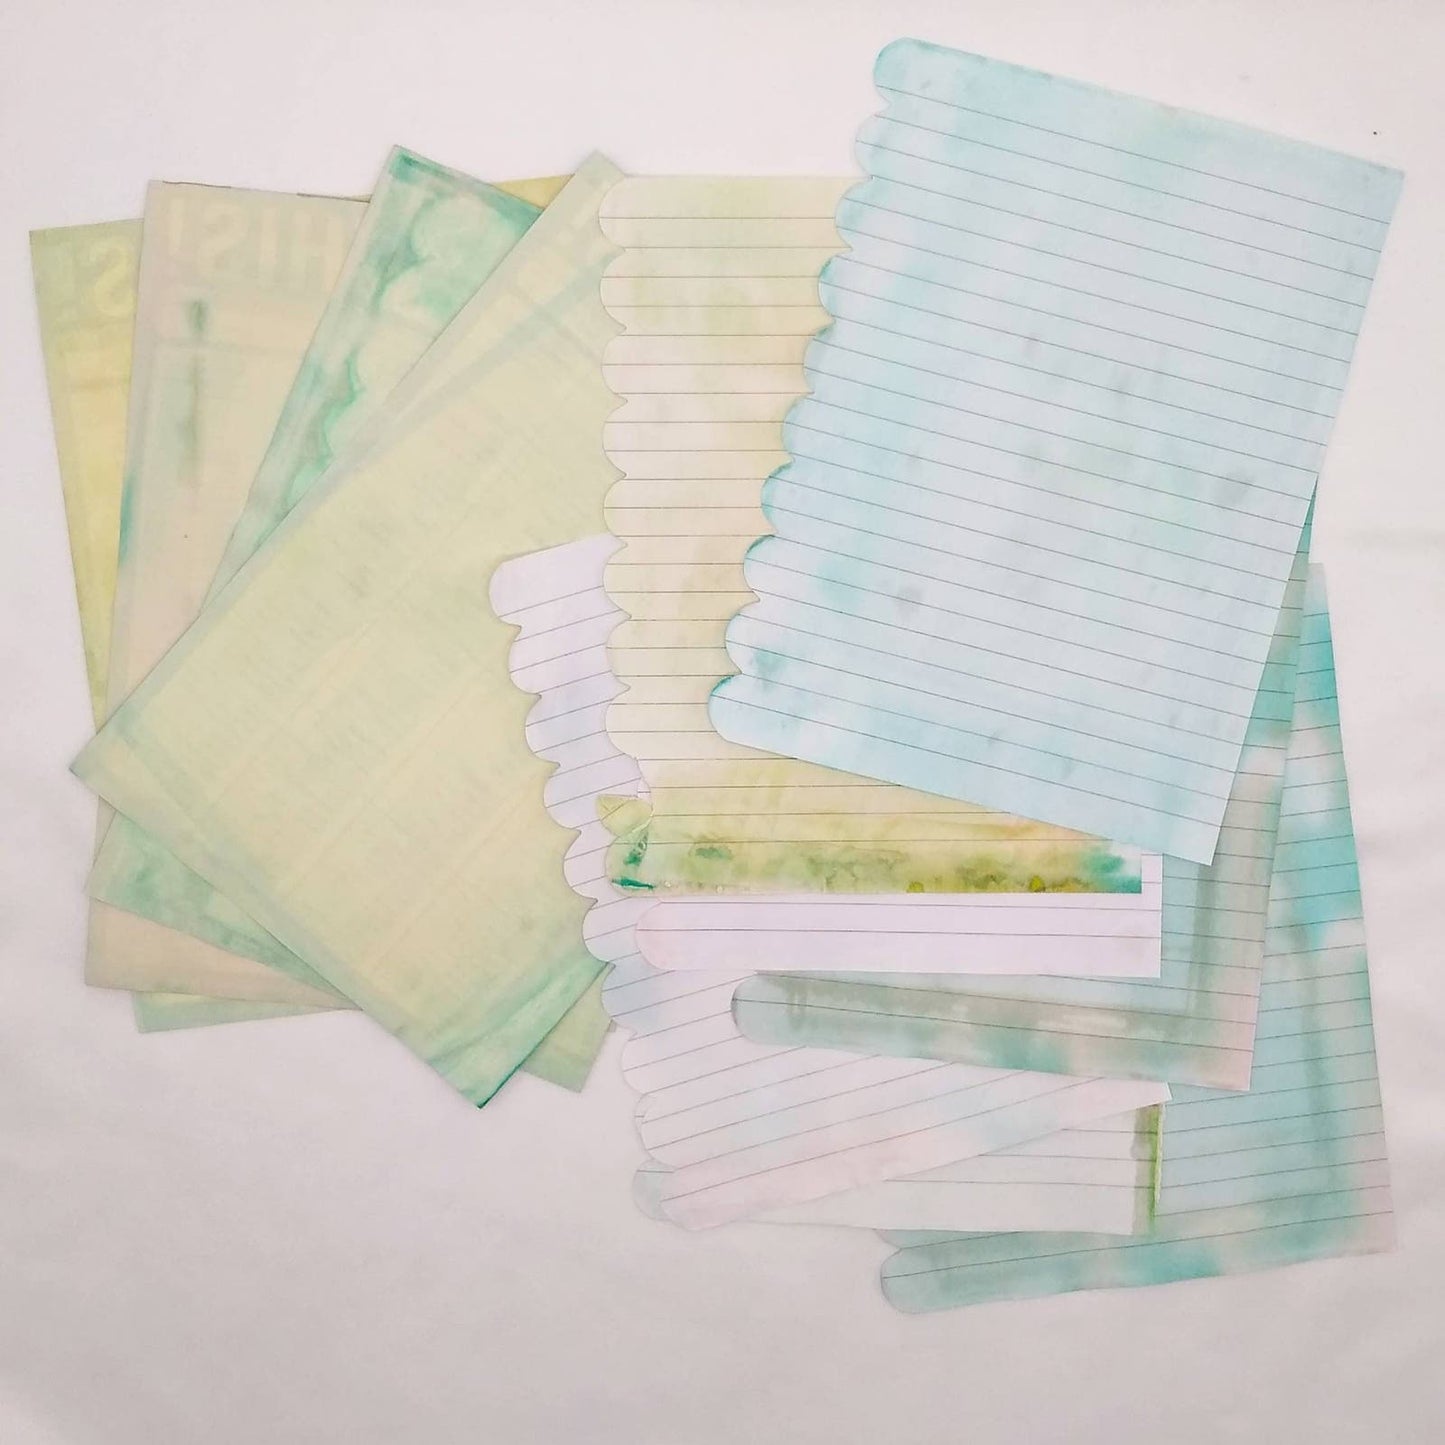 Dyed Papers Variety Pack, Pastel Dyed Paper, Hand Dyed Papers, Junk Journal Supply